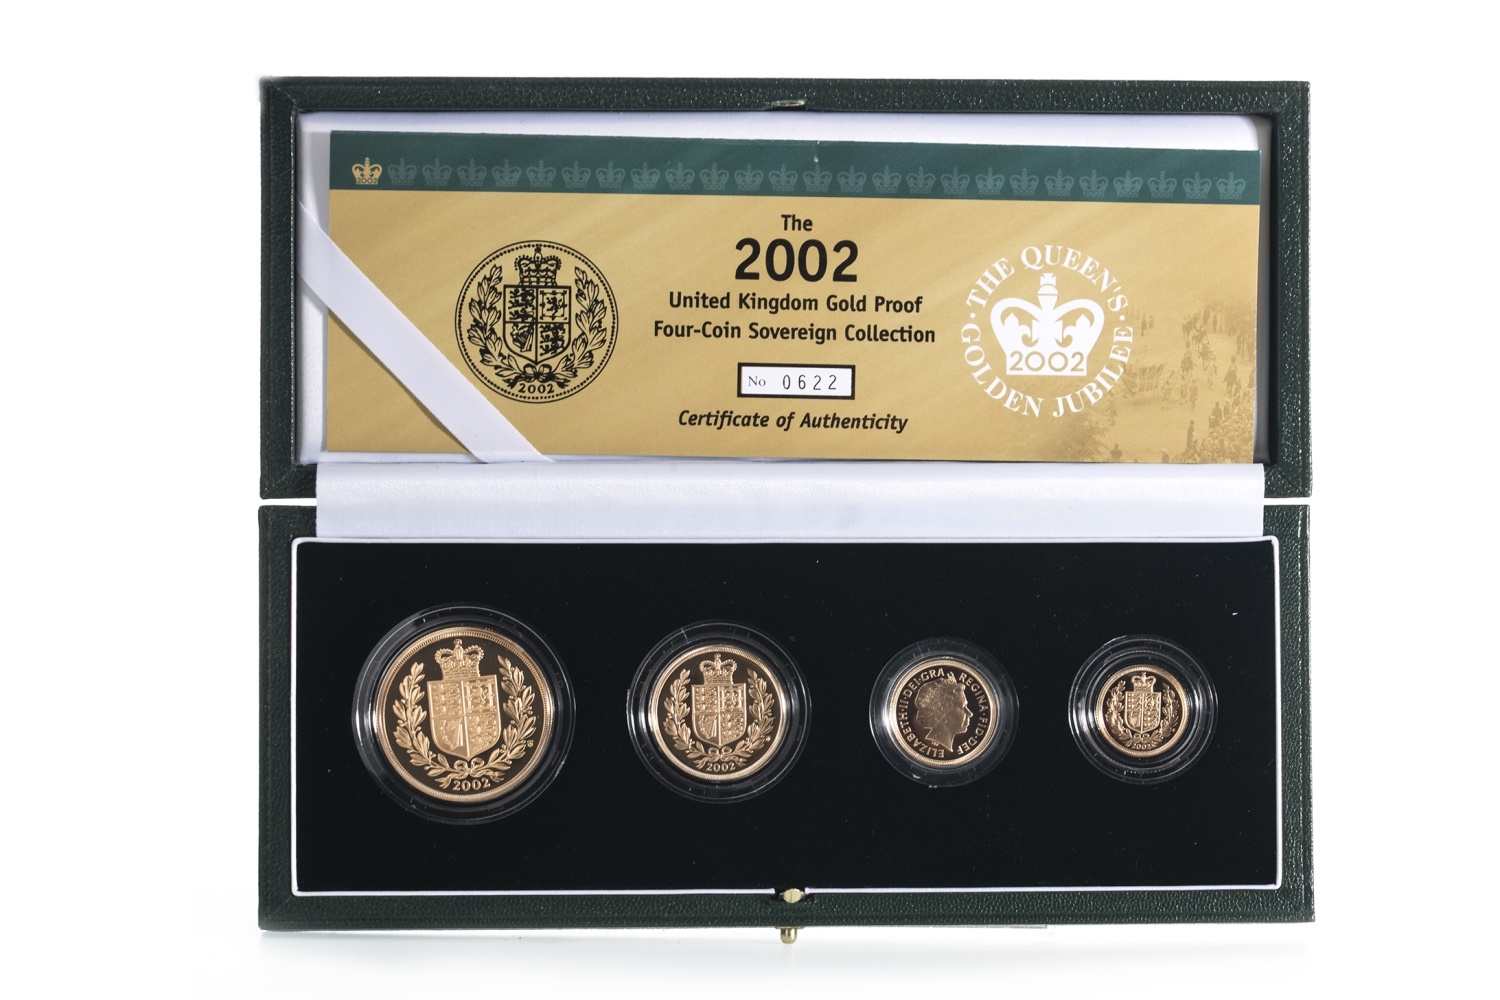 2002 GOLD PROOF UK SOVEREIGN COLLECTION FOUR COIN SET